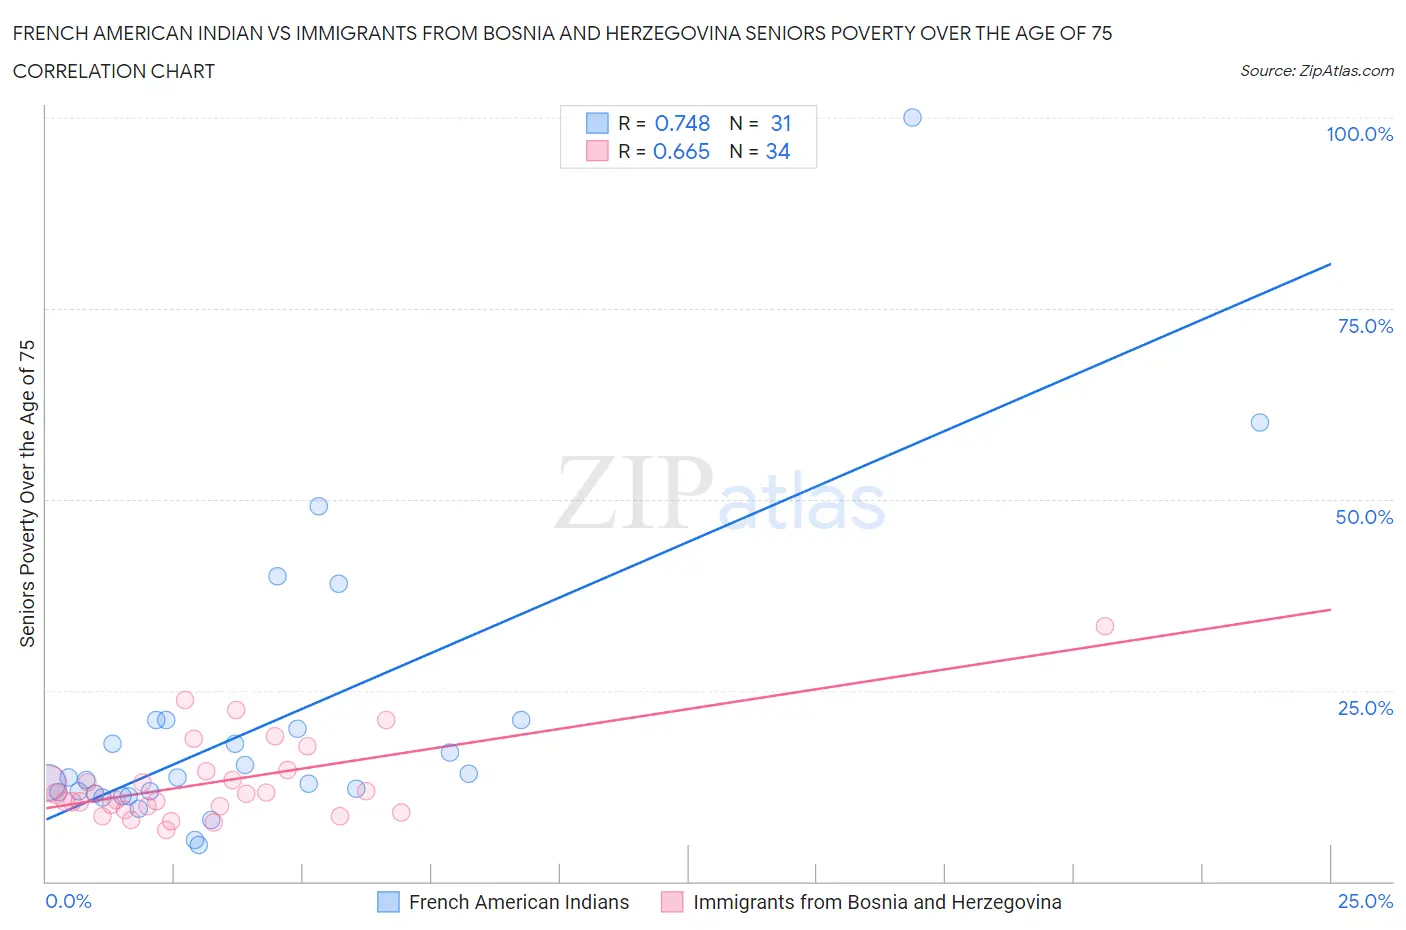 French American Indian vs Immigrants from Bosnia and Herzegovina Seniors Poverty Over the Age of 75